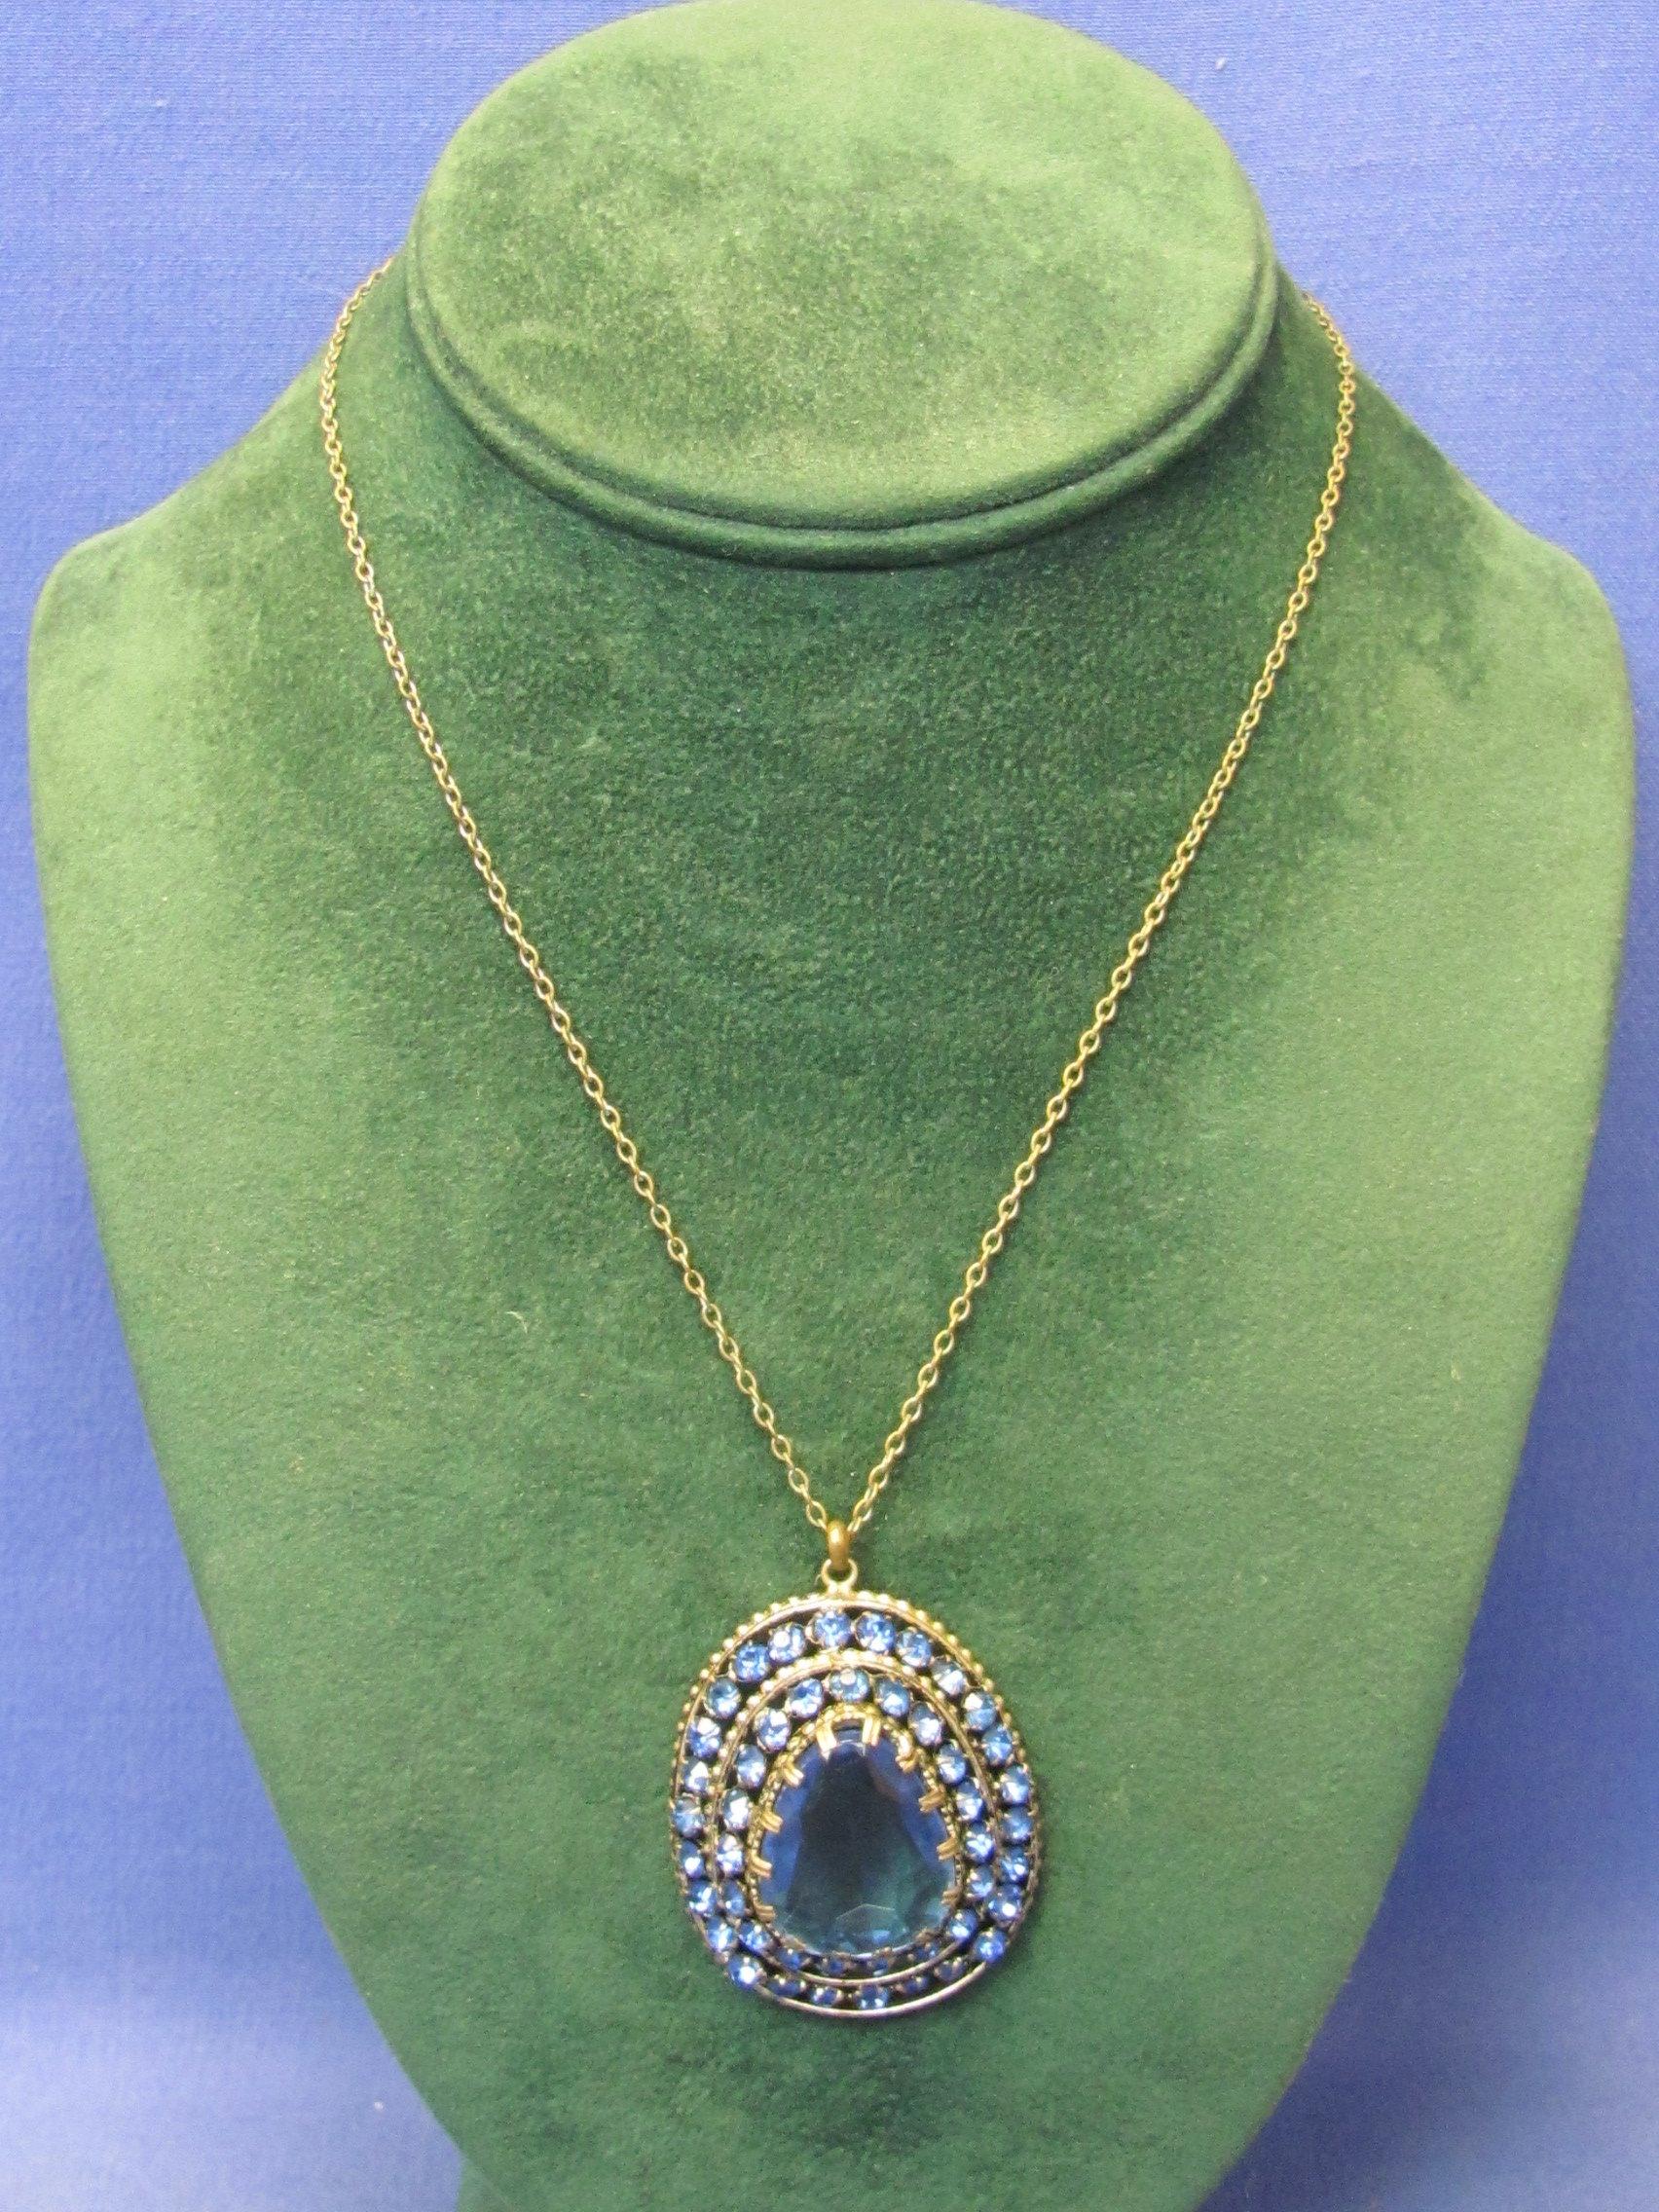 Vintage Pendant w Blue Stones – Made in Czechoslovakia – 1 1/2” long – 16” Chain